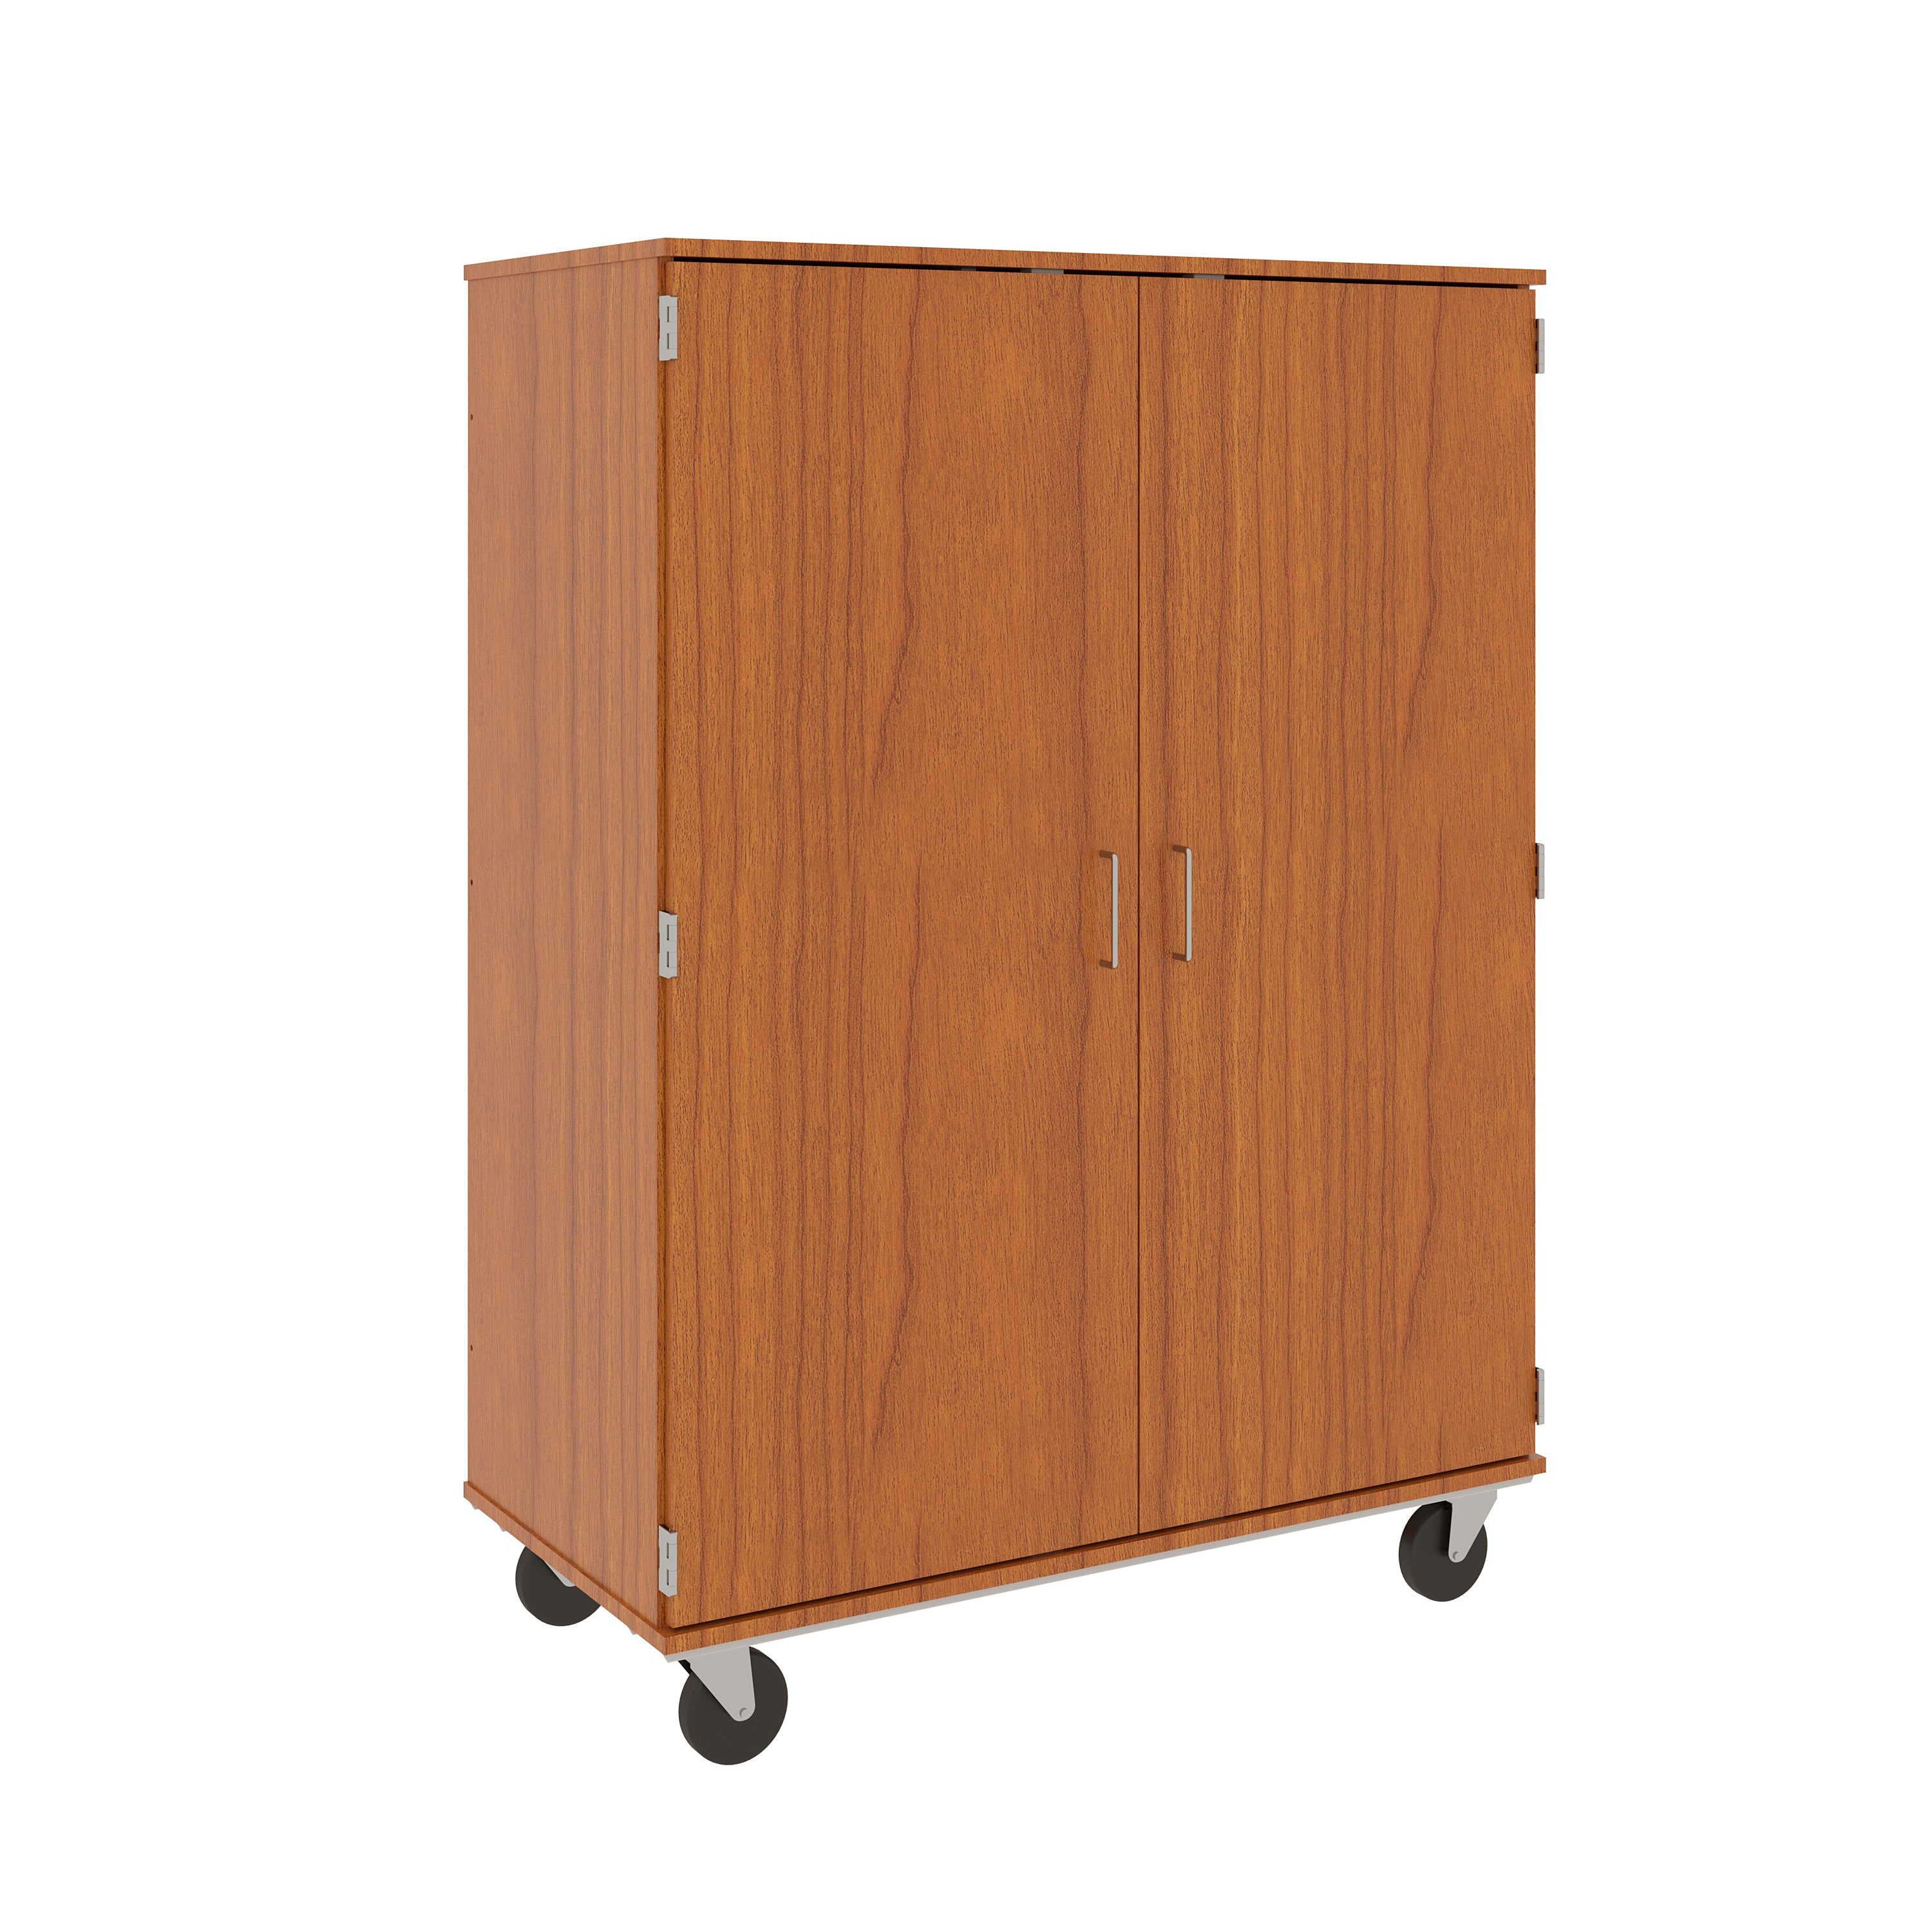 67" Tall Assembled Mobile Computer Storage Cabinet with Lockable Doors - 80610 F67